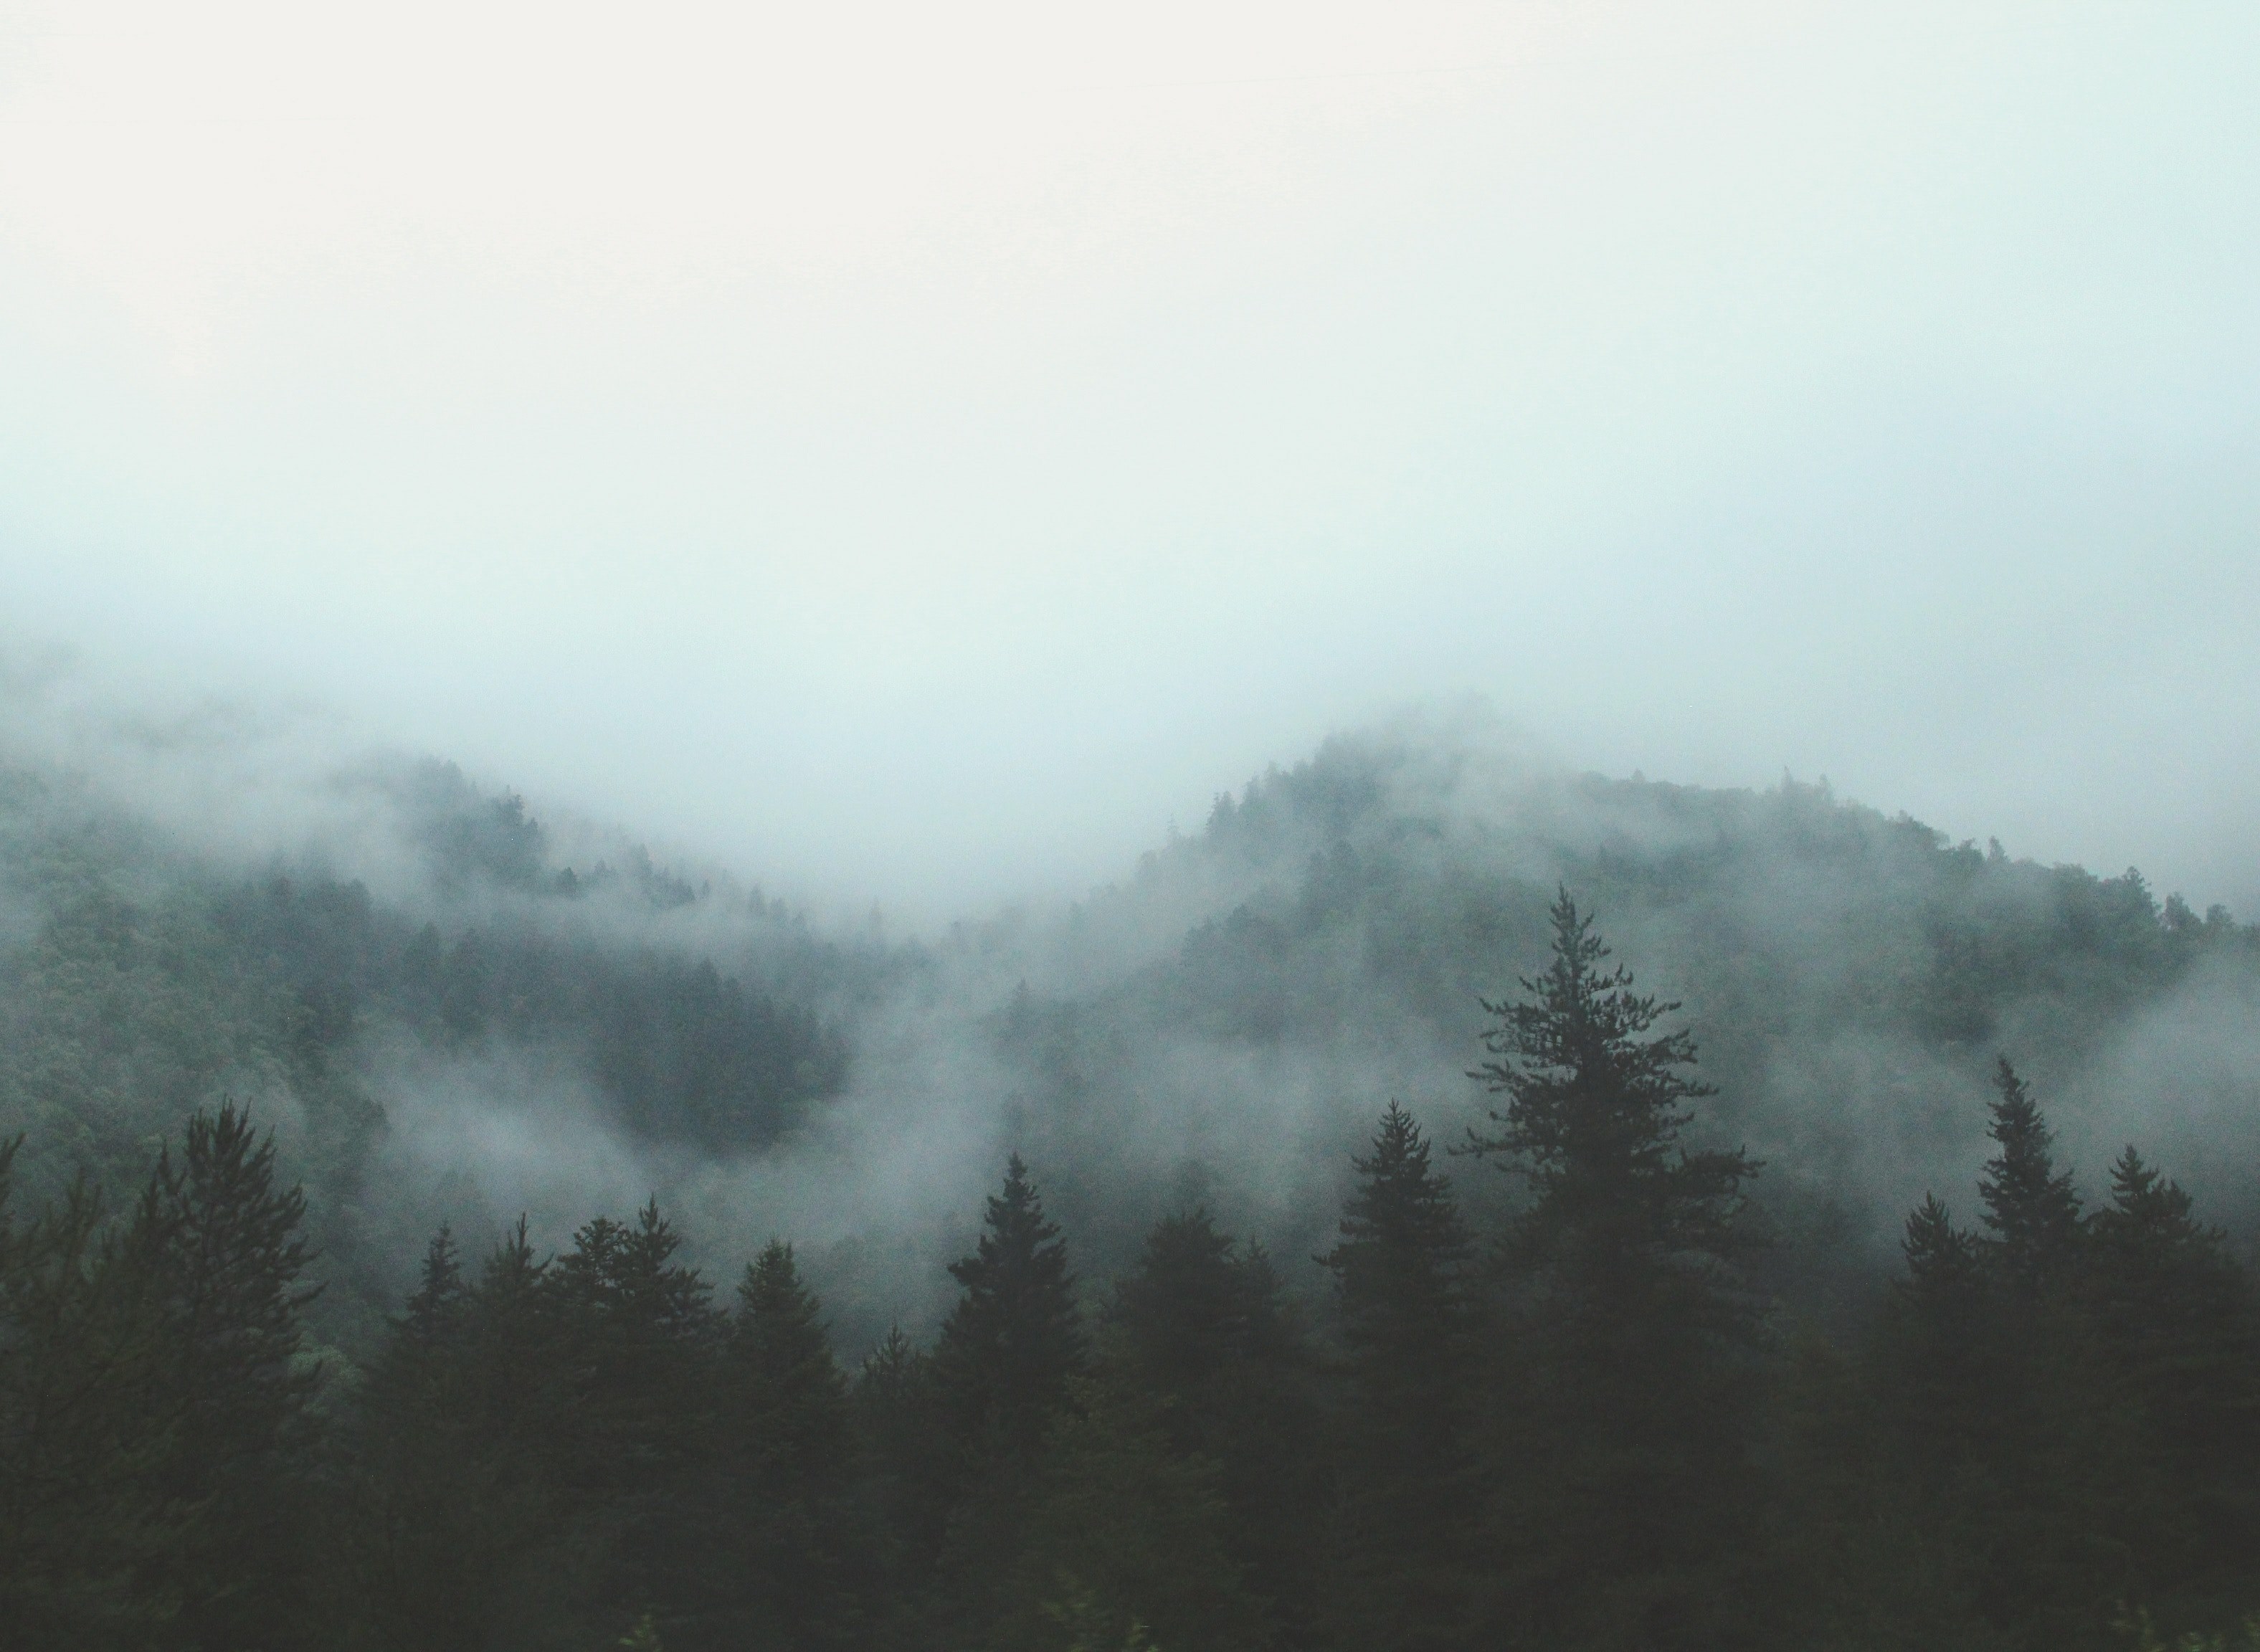 Wallpaper / cloud mountain overcast and forest HD 4k wallpaper free download